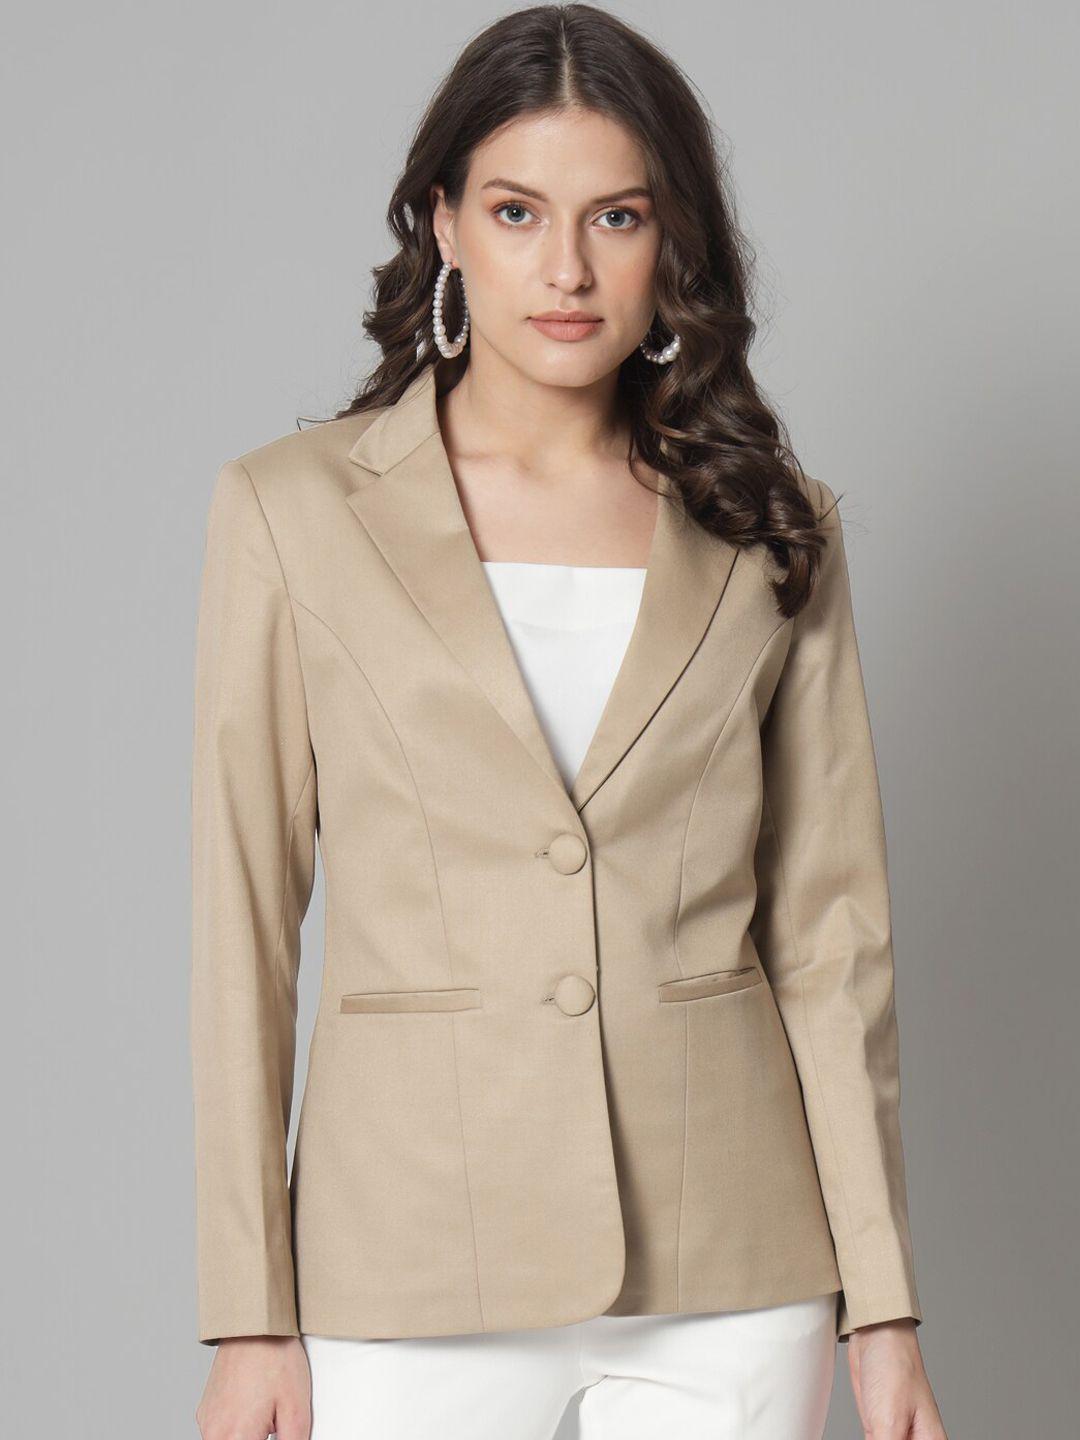 powersutra notched lapel single-breasted blazer